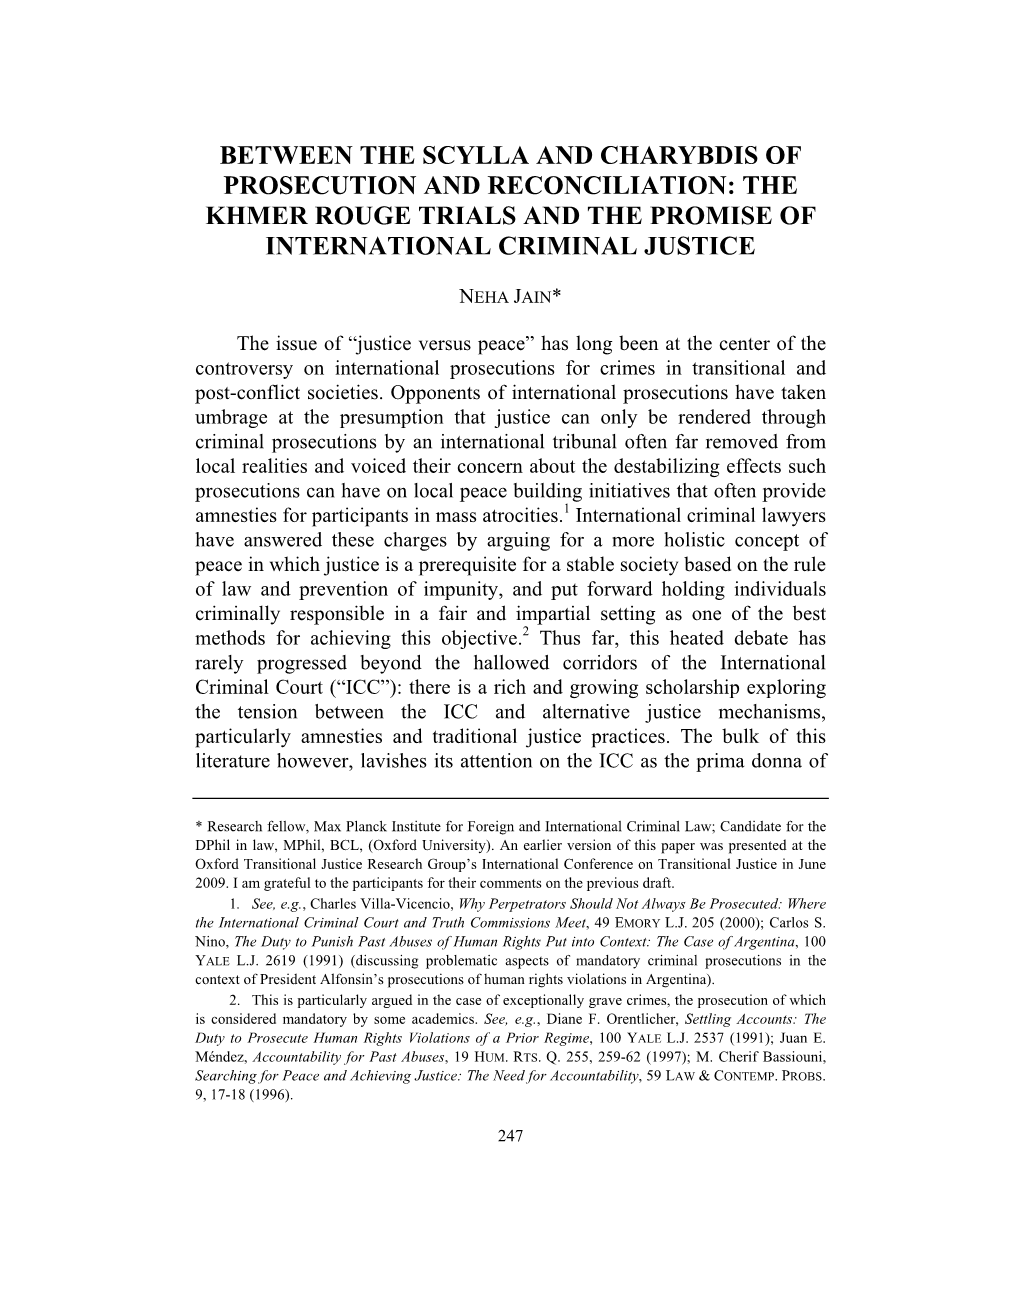 Between the Scylla and Charybdis of Prosecution and Reconciliation: the Khmer Rouge Trials and the Promise of International Criminal Justice